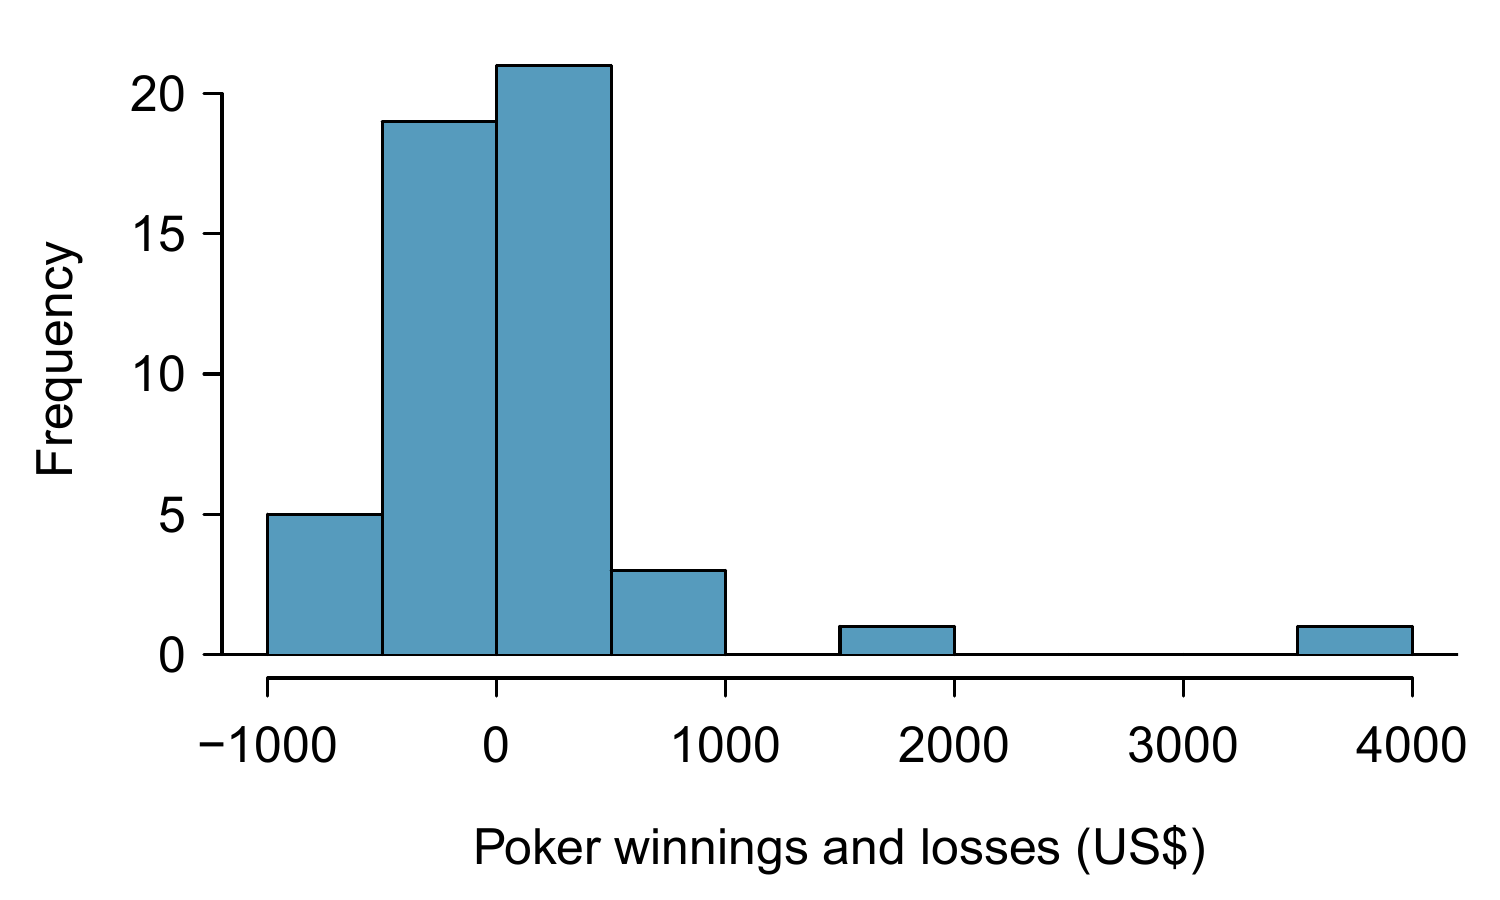 Sample distribution of poker winnings. These data include some very clear outliers. These are problematic when considering the normality of the sample mean. For example, outliers are often an indicator of very strong skew.